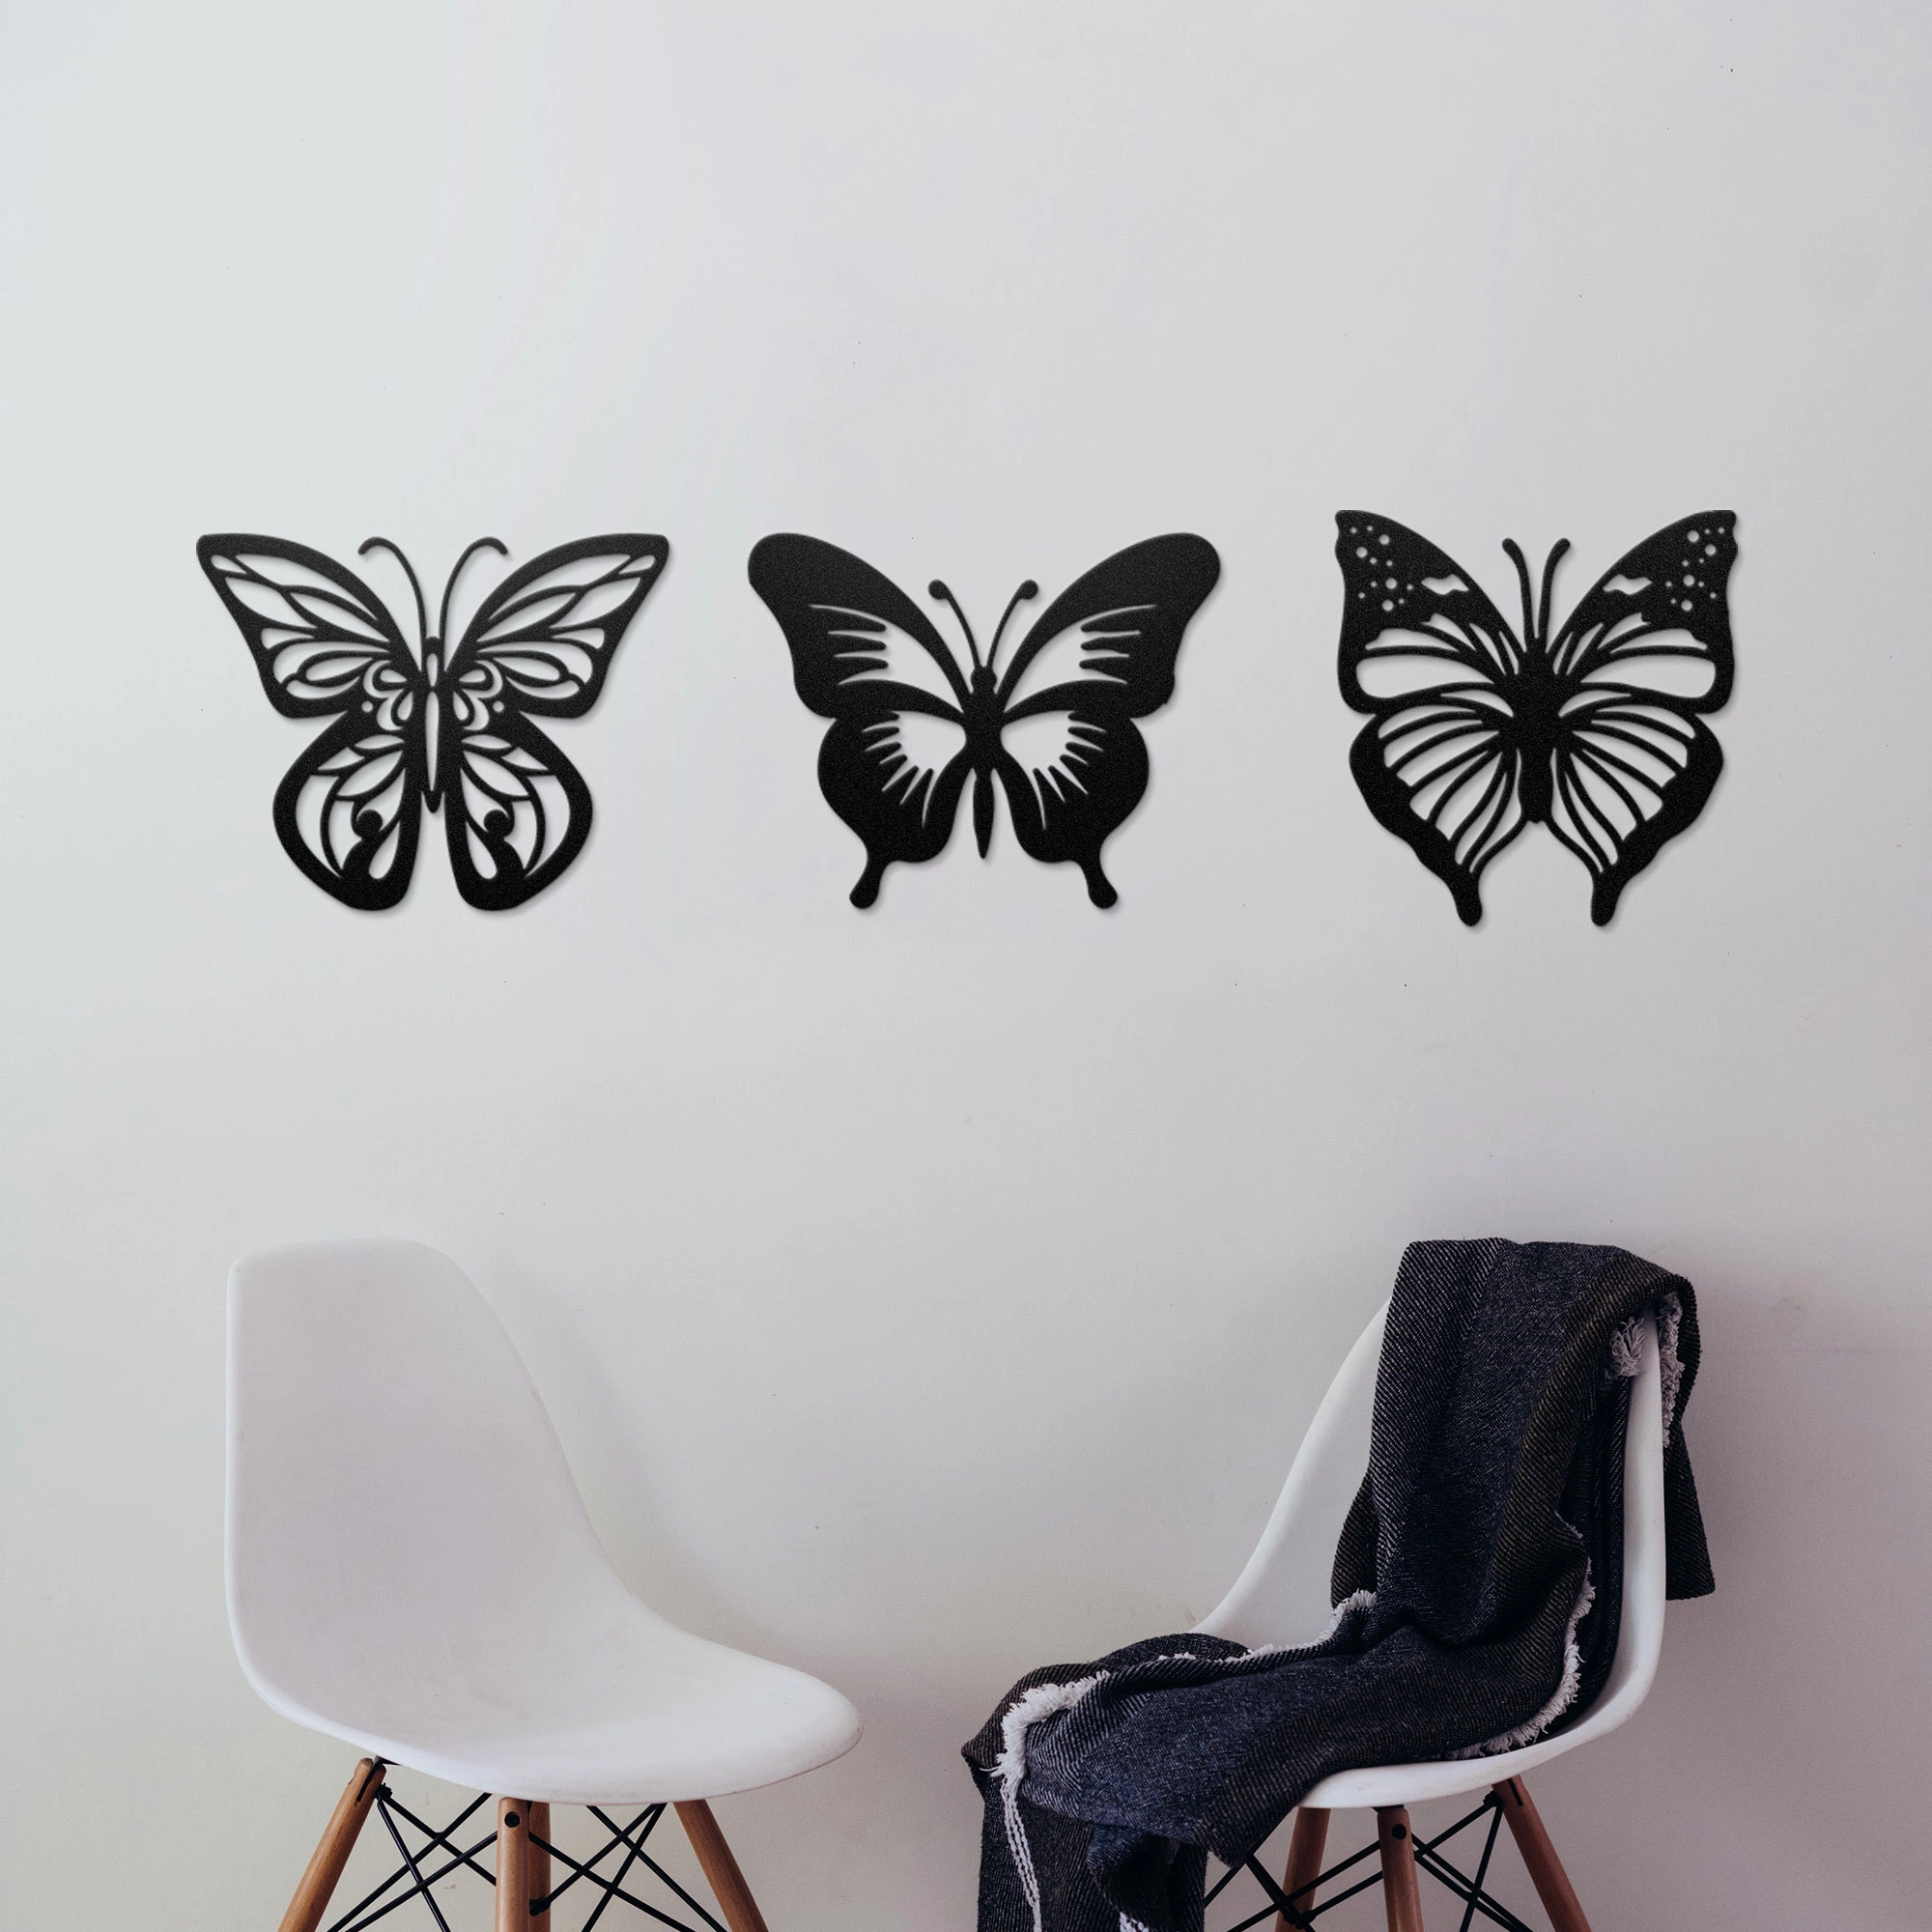 3Pieces Butterfly Wall Decor